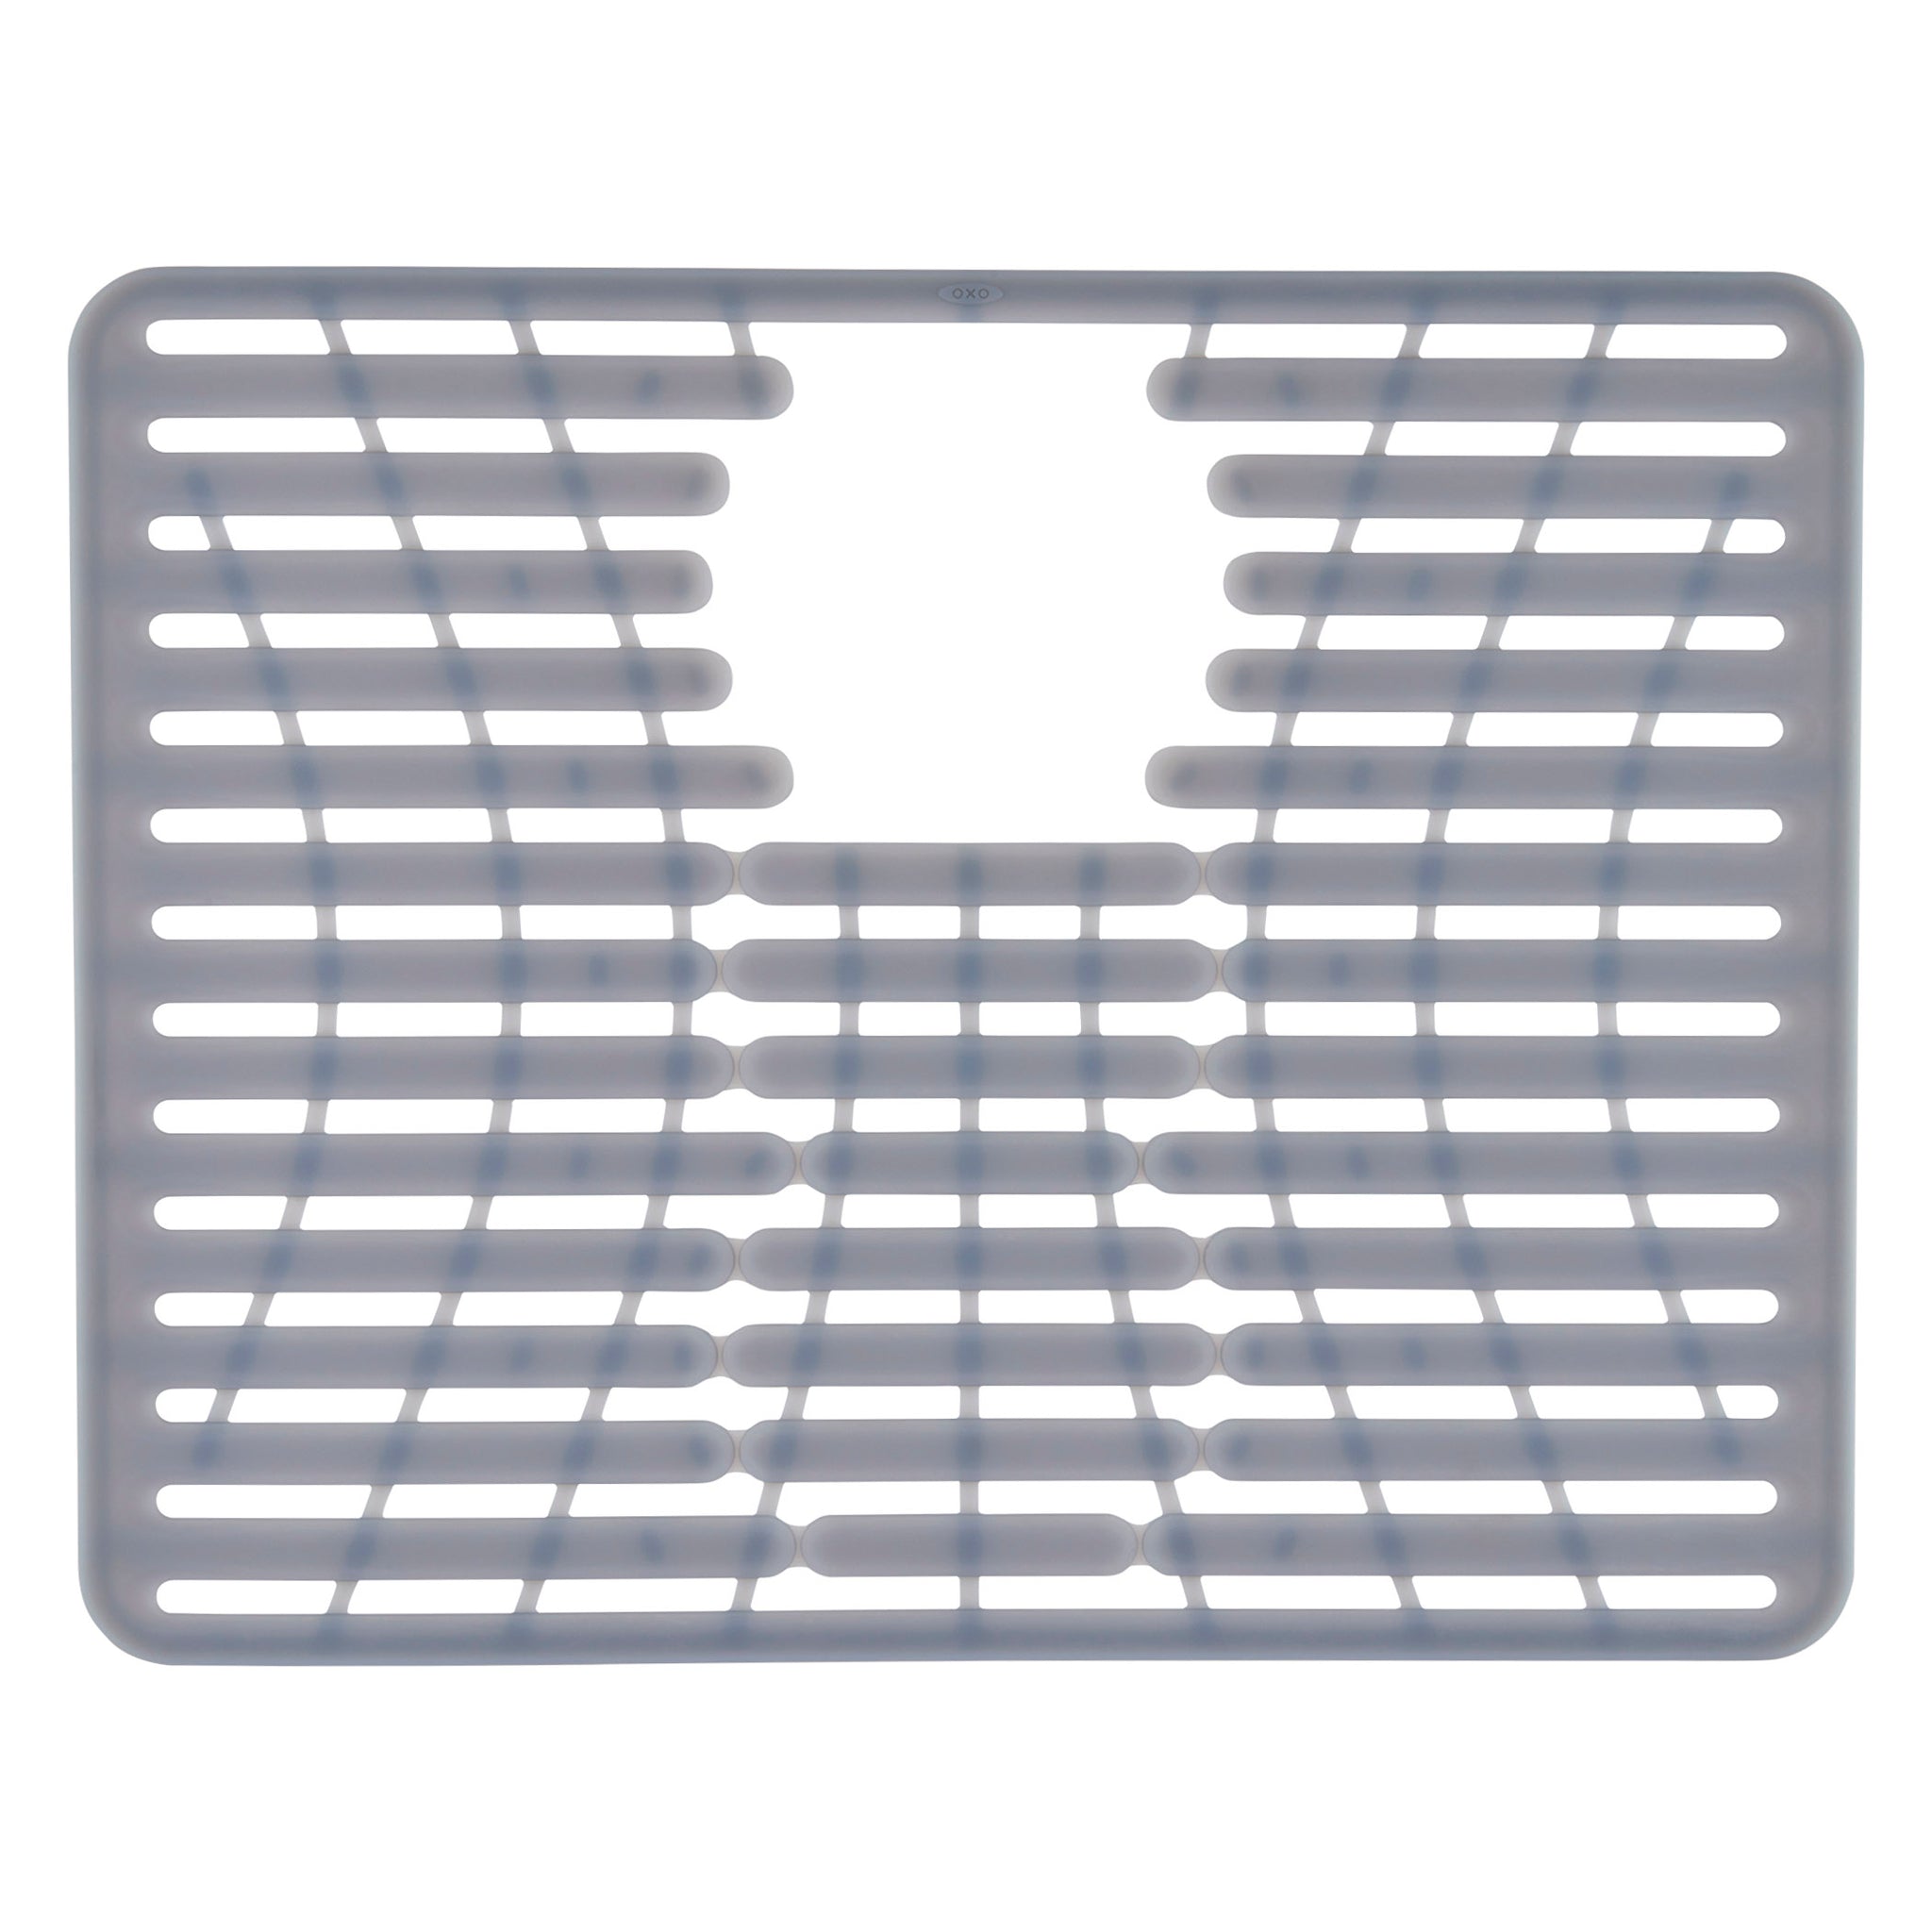 OXO Good Grips Large Silicone Sink Mat 13138200 – Good's Store Online